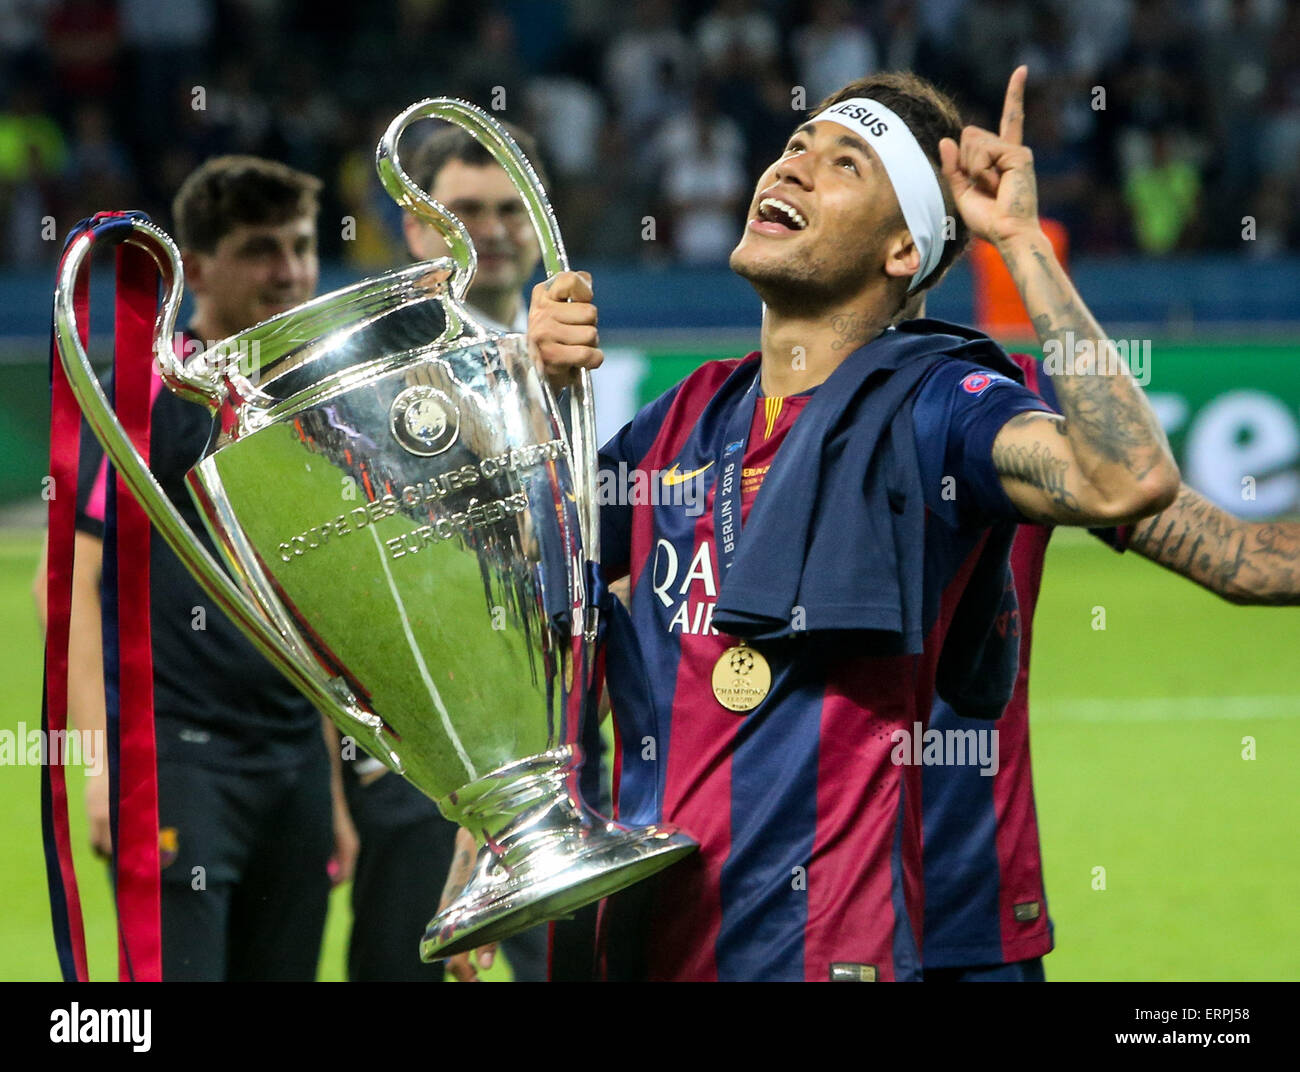 Berlin, Germany. 6th June, 2015. Neymar (C) of FC Barcelona celebrates with  the trophy after the UEFA Champions League final match between Juventus  F.C. and FC Barcelona in Berlin, Germany, June 6,